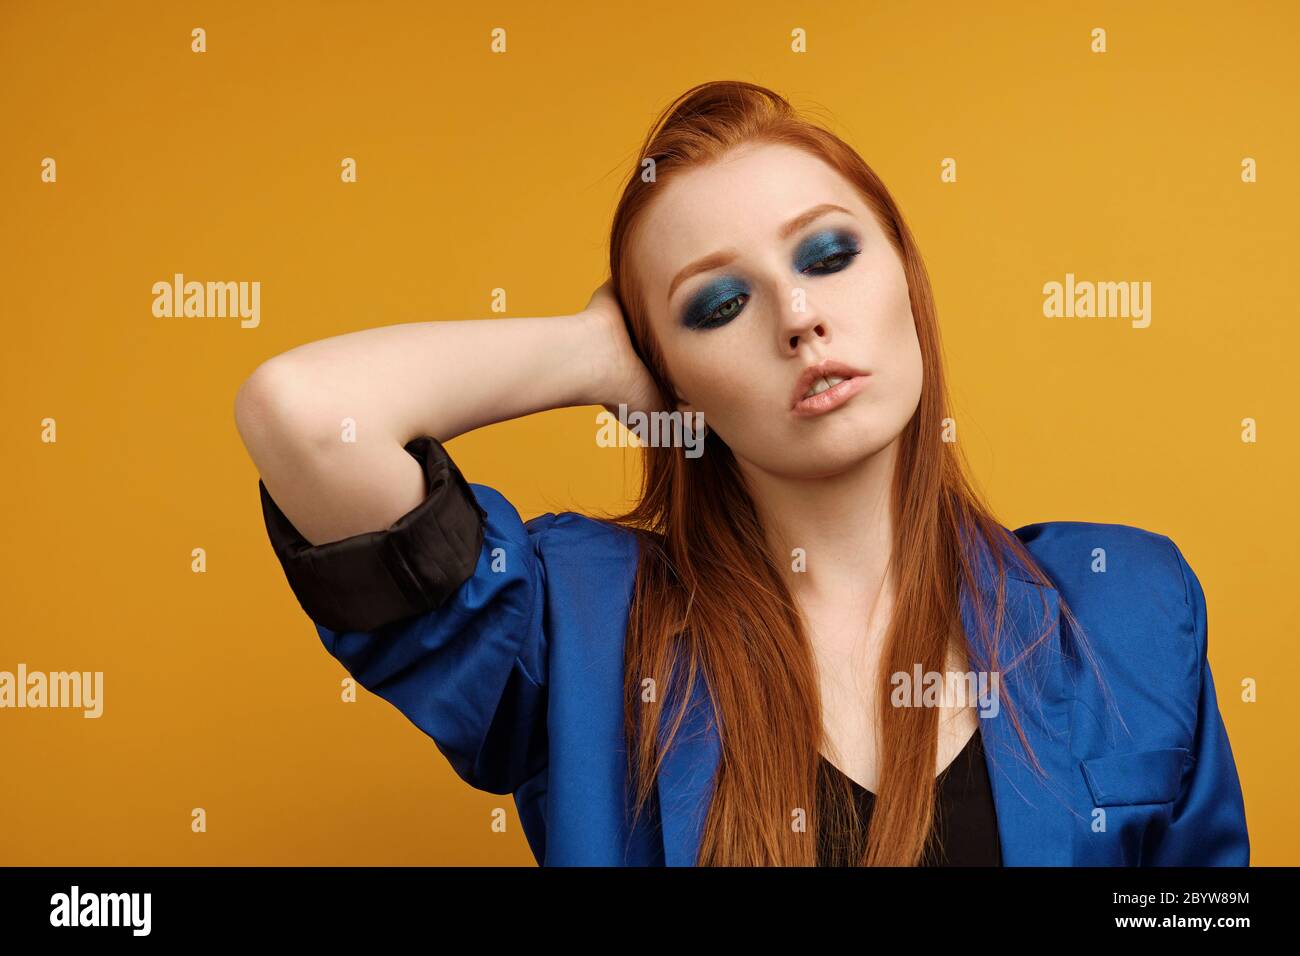 Redhead girl in a jacket and with blue eye makeup is standing on a yellow background, running hand through hair and looking down Stock Photo